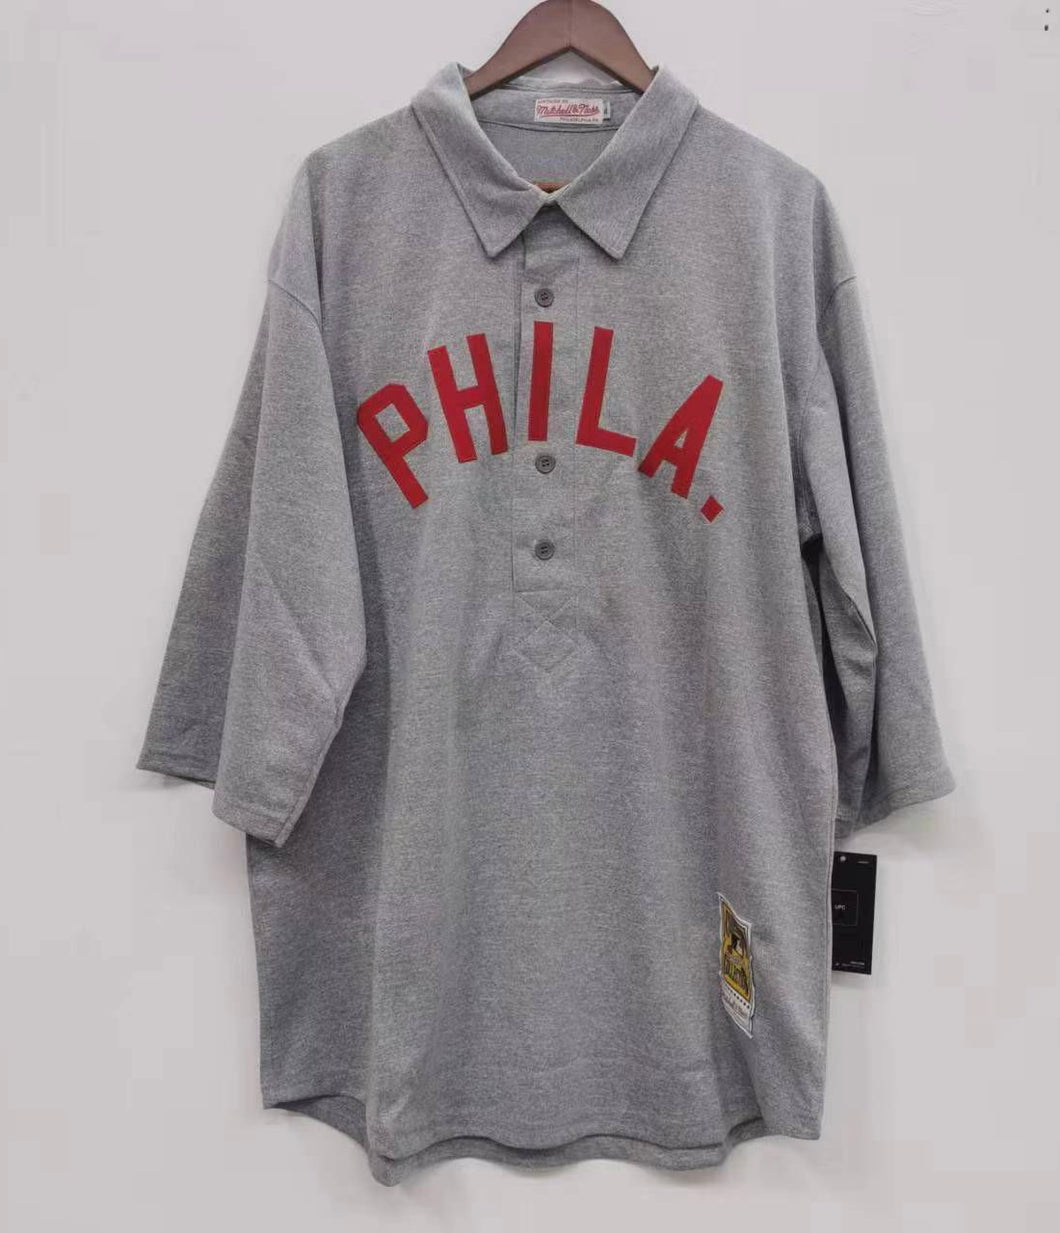 Old Time  Philadelphia Phillies Jersey from the 1920s